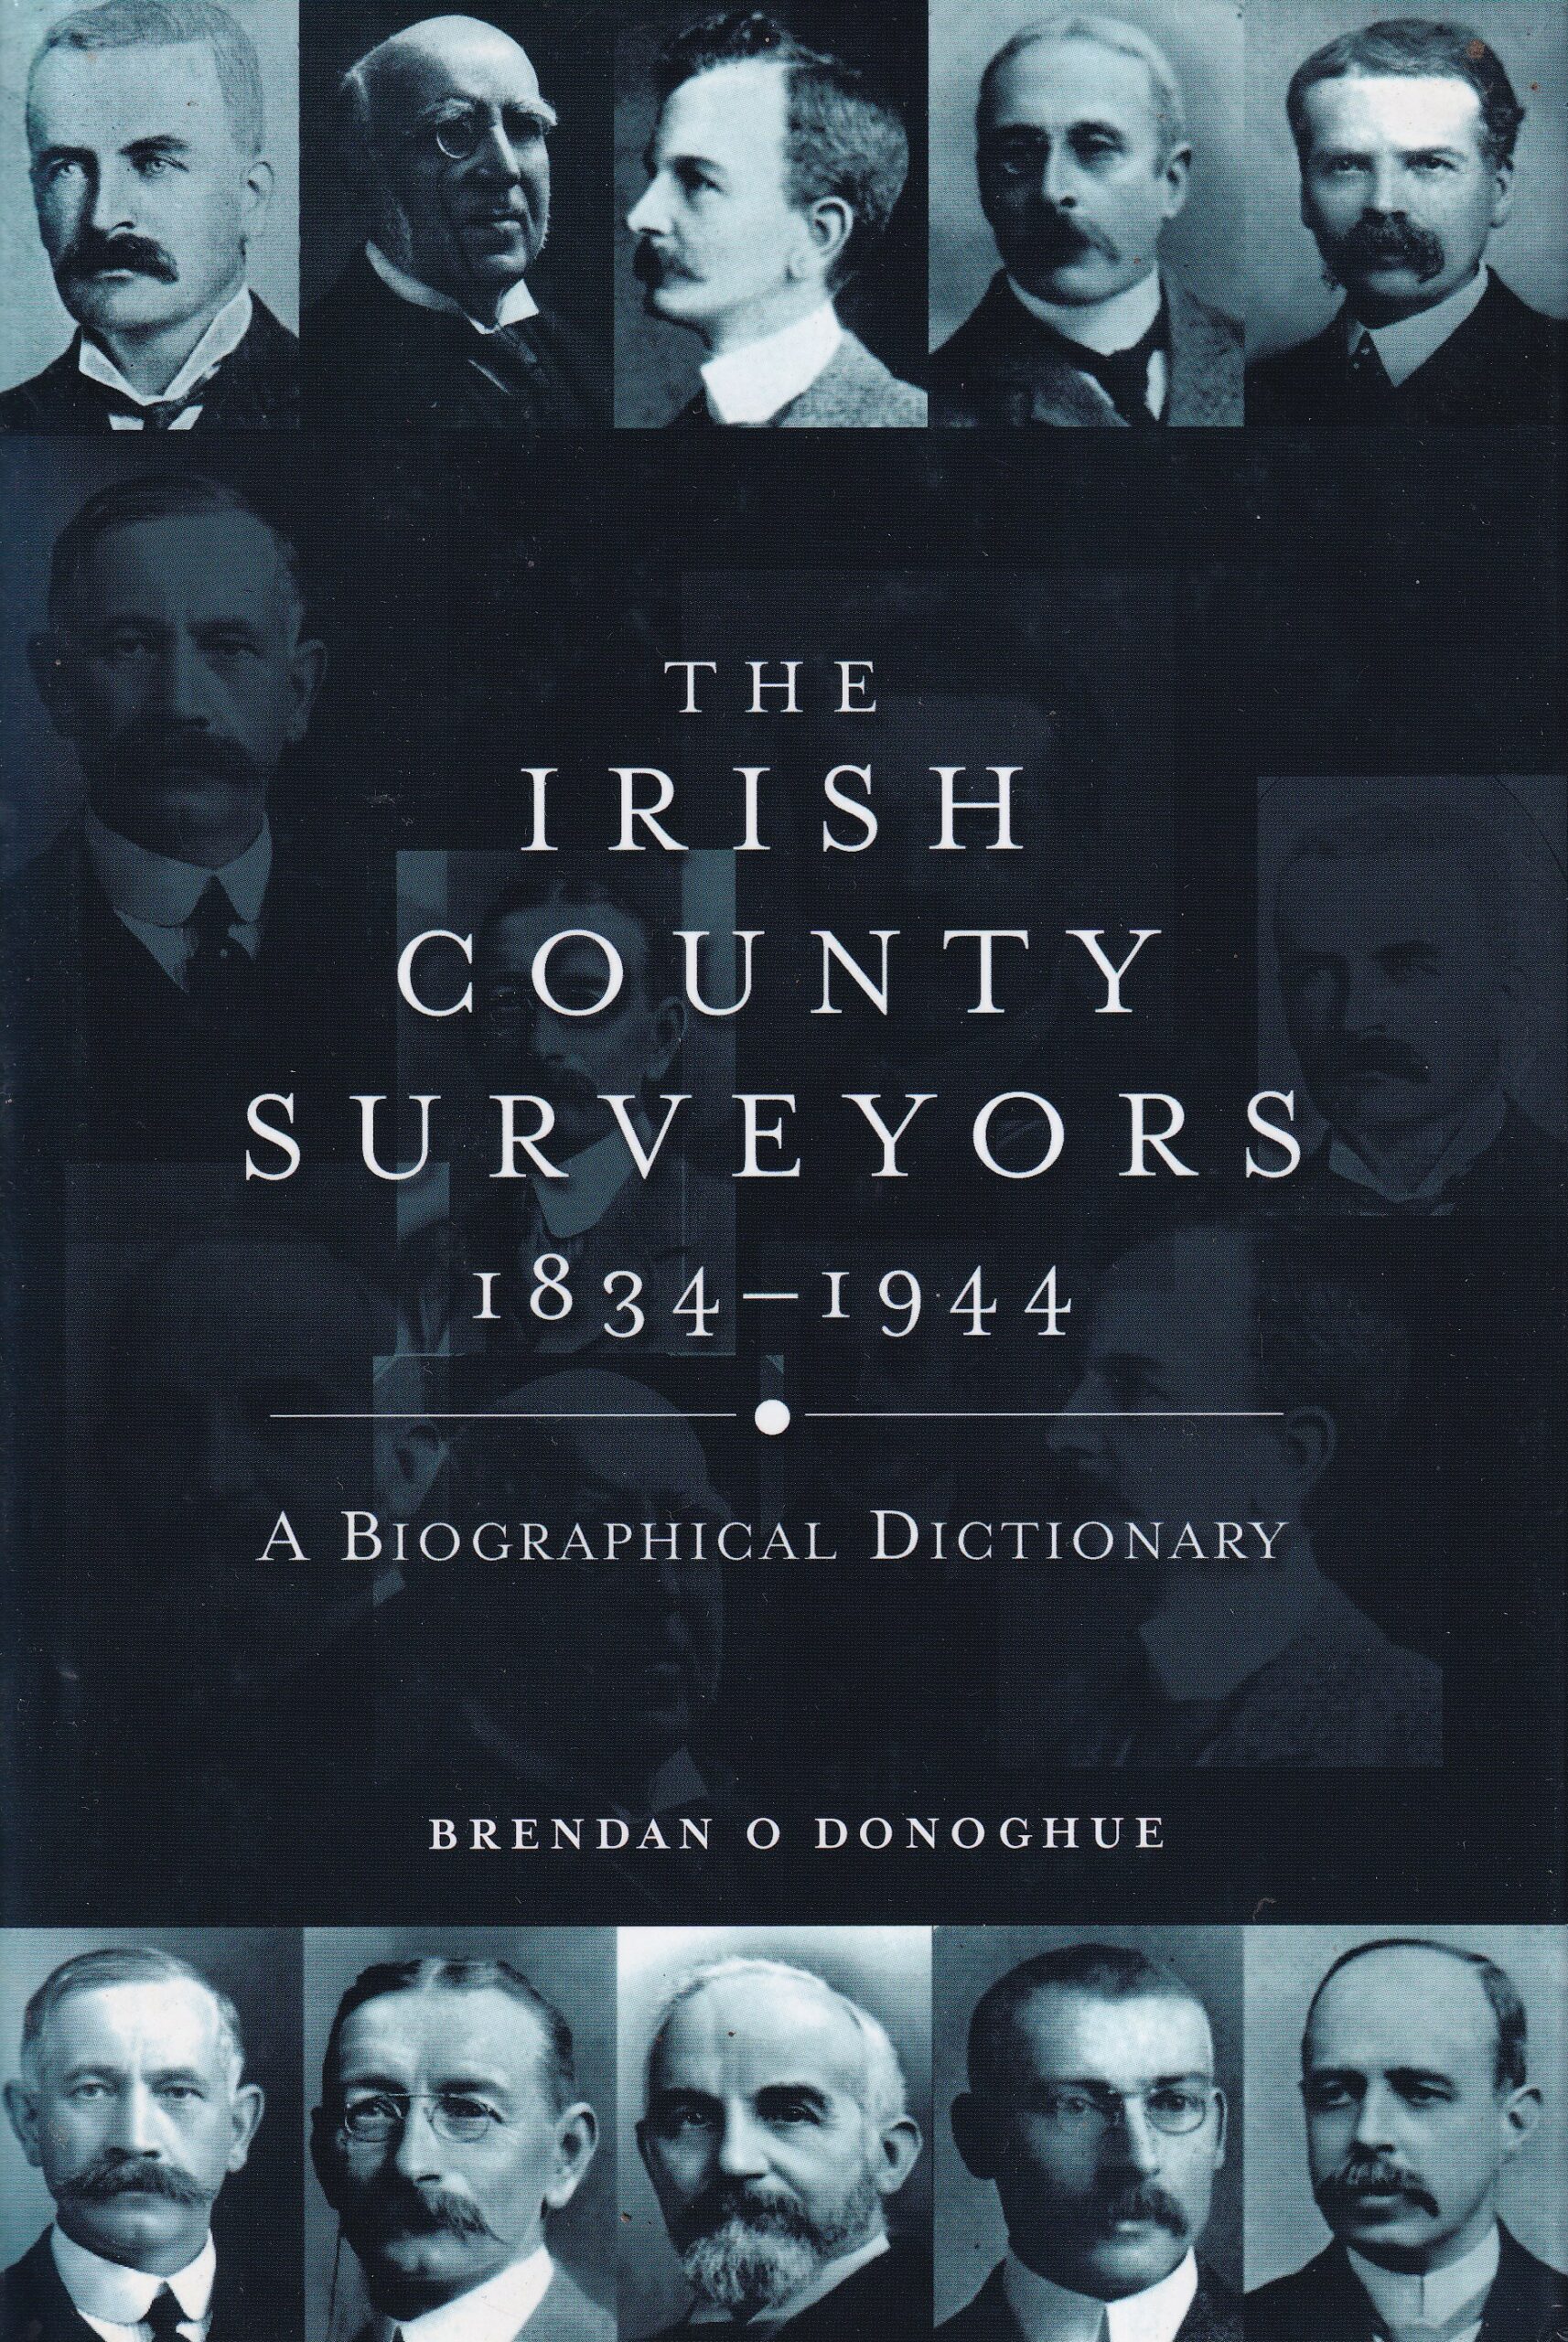 The Irish County Surveyors 1834-1944: A Bibliographical Dictionary | Brendan O' Donoghue | Charlie Byrne's